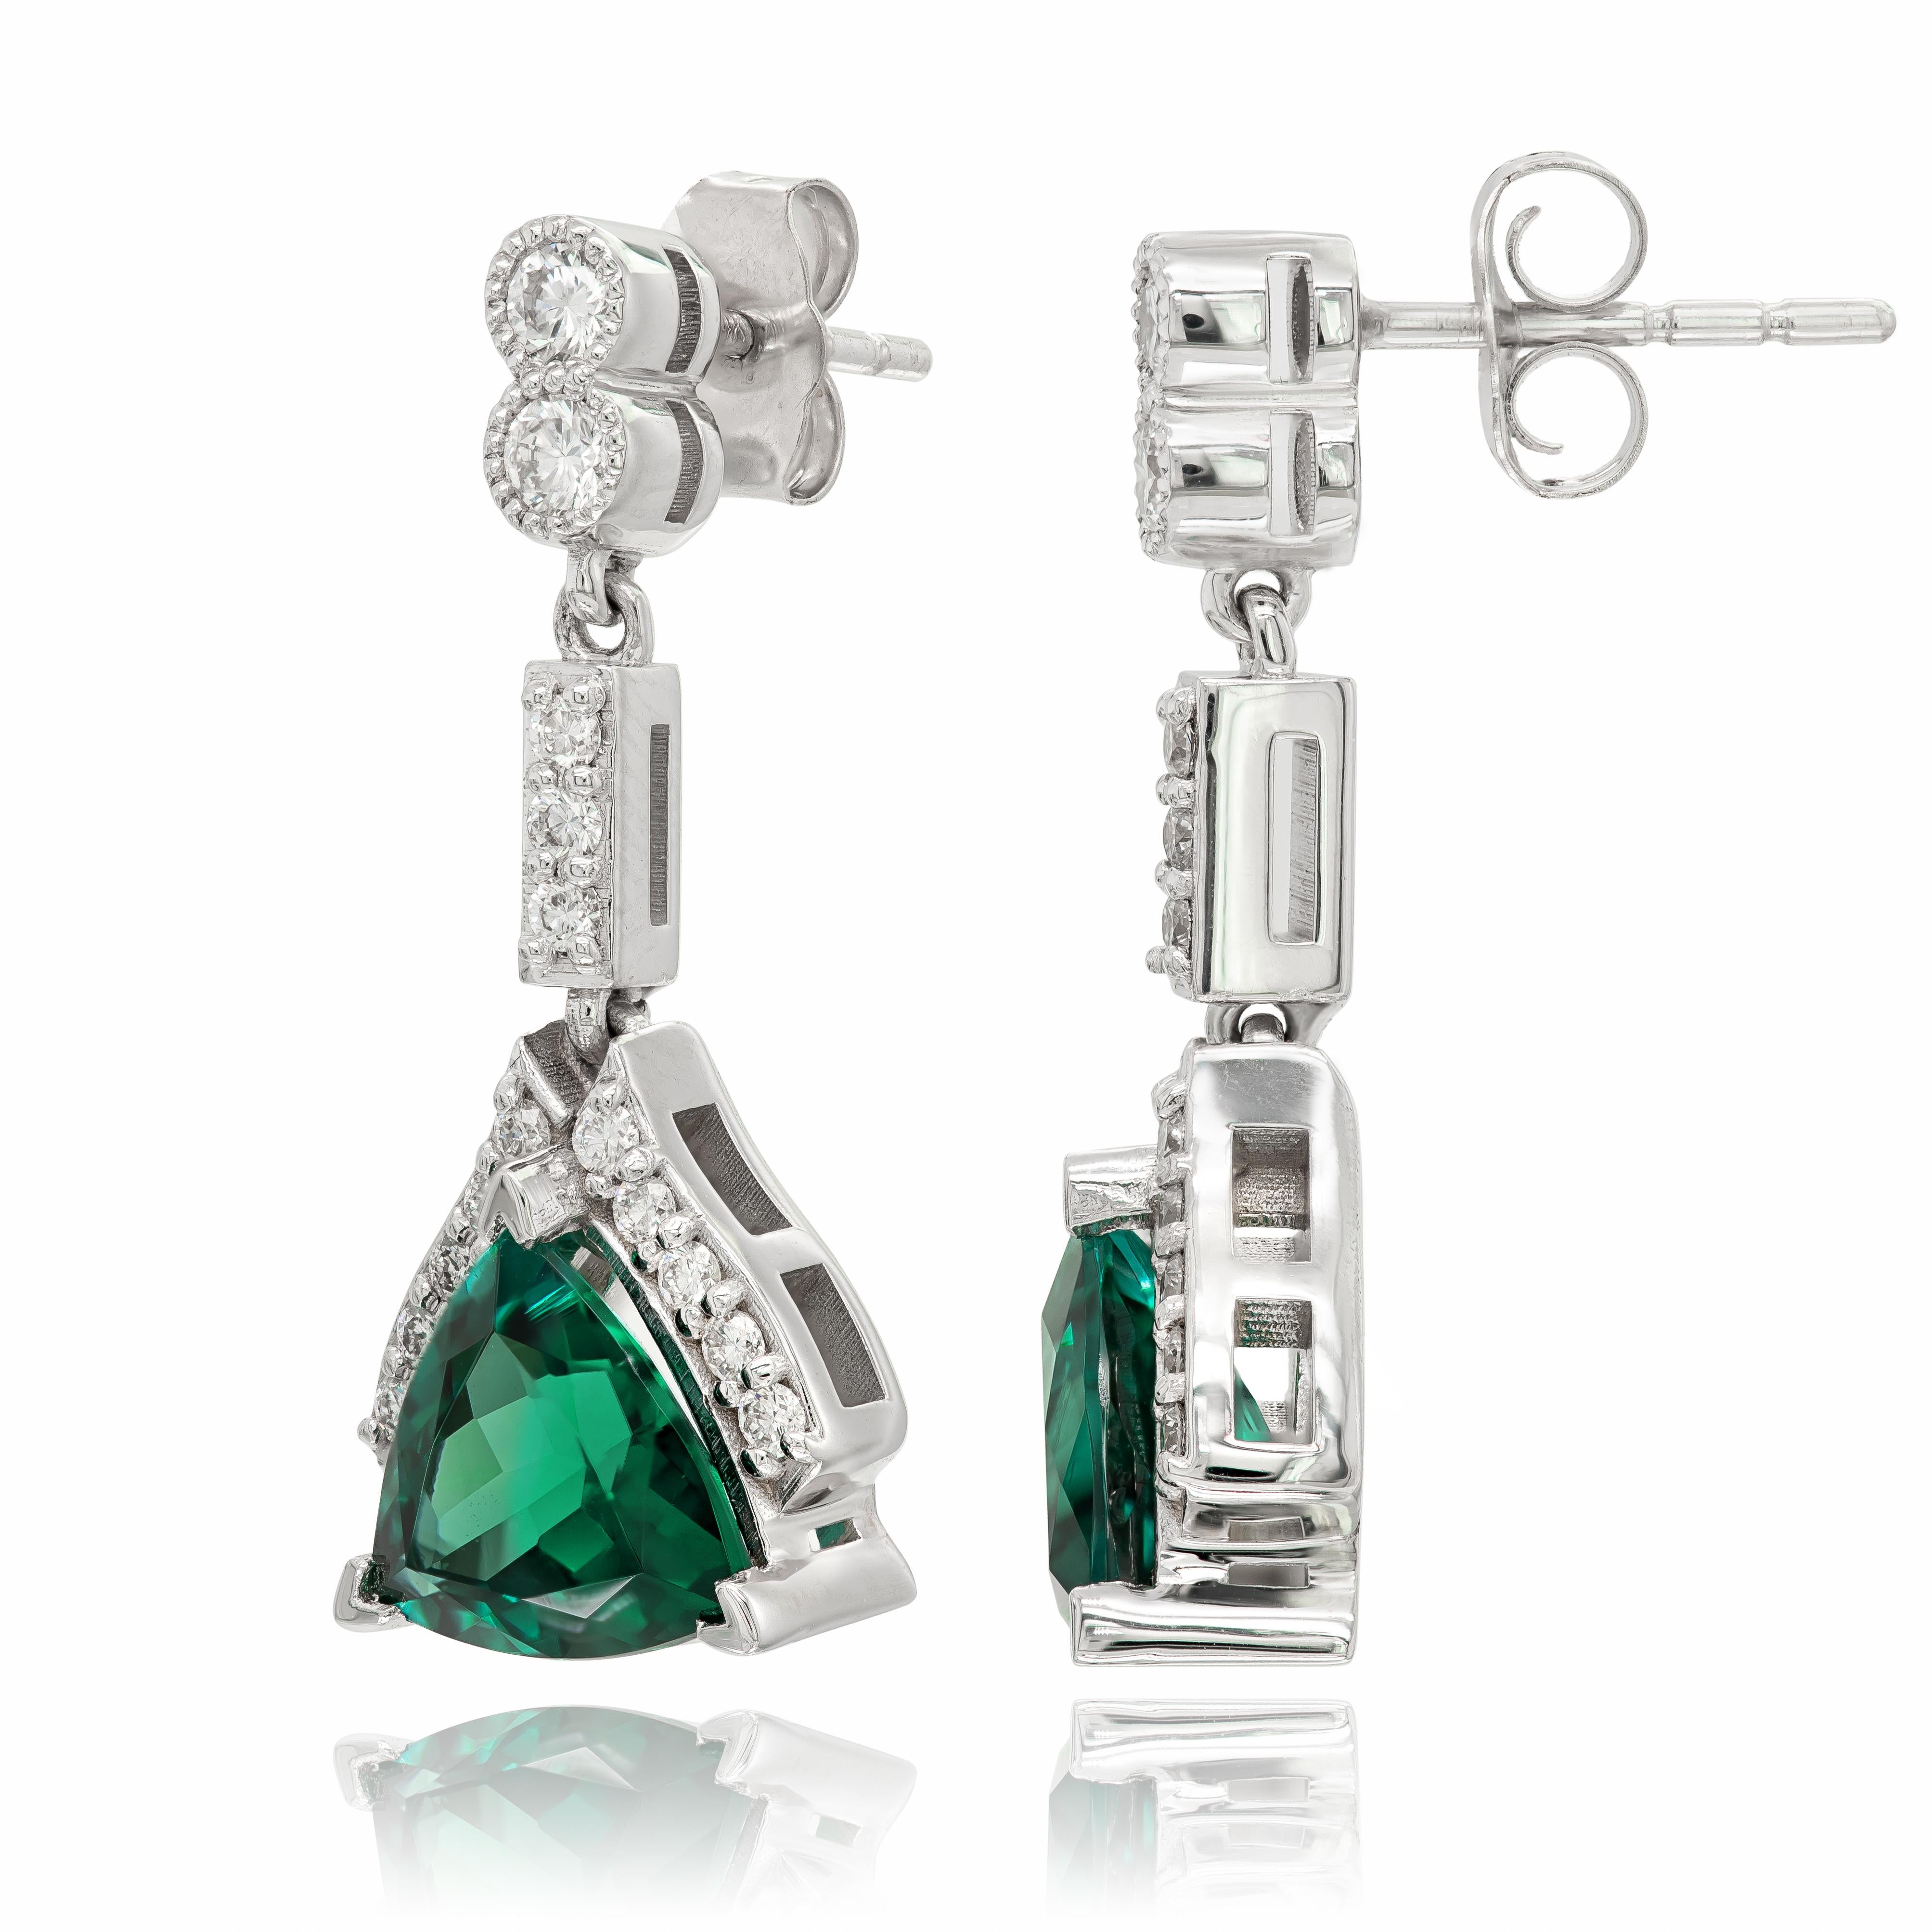 Introducing our captivating Blue-Green Tourmaline Earrings, a harmonious fusion of 2.89 carats of mesmerizing gemstones and a beautifully textured 14K White Gold setting. The brilliance of the stones against the lustrous precious metal forms an